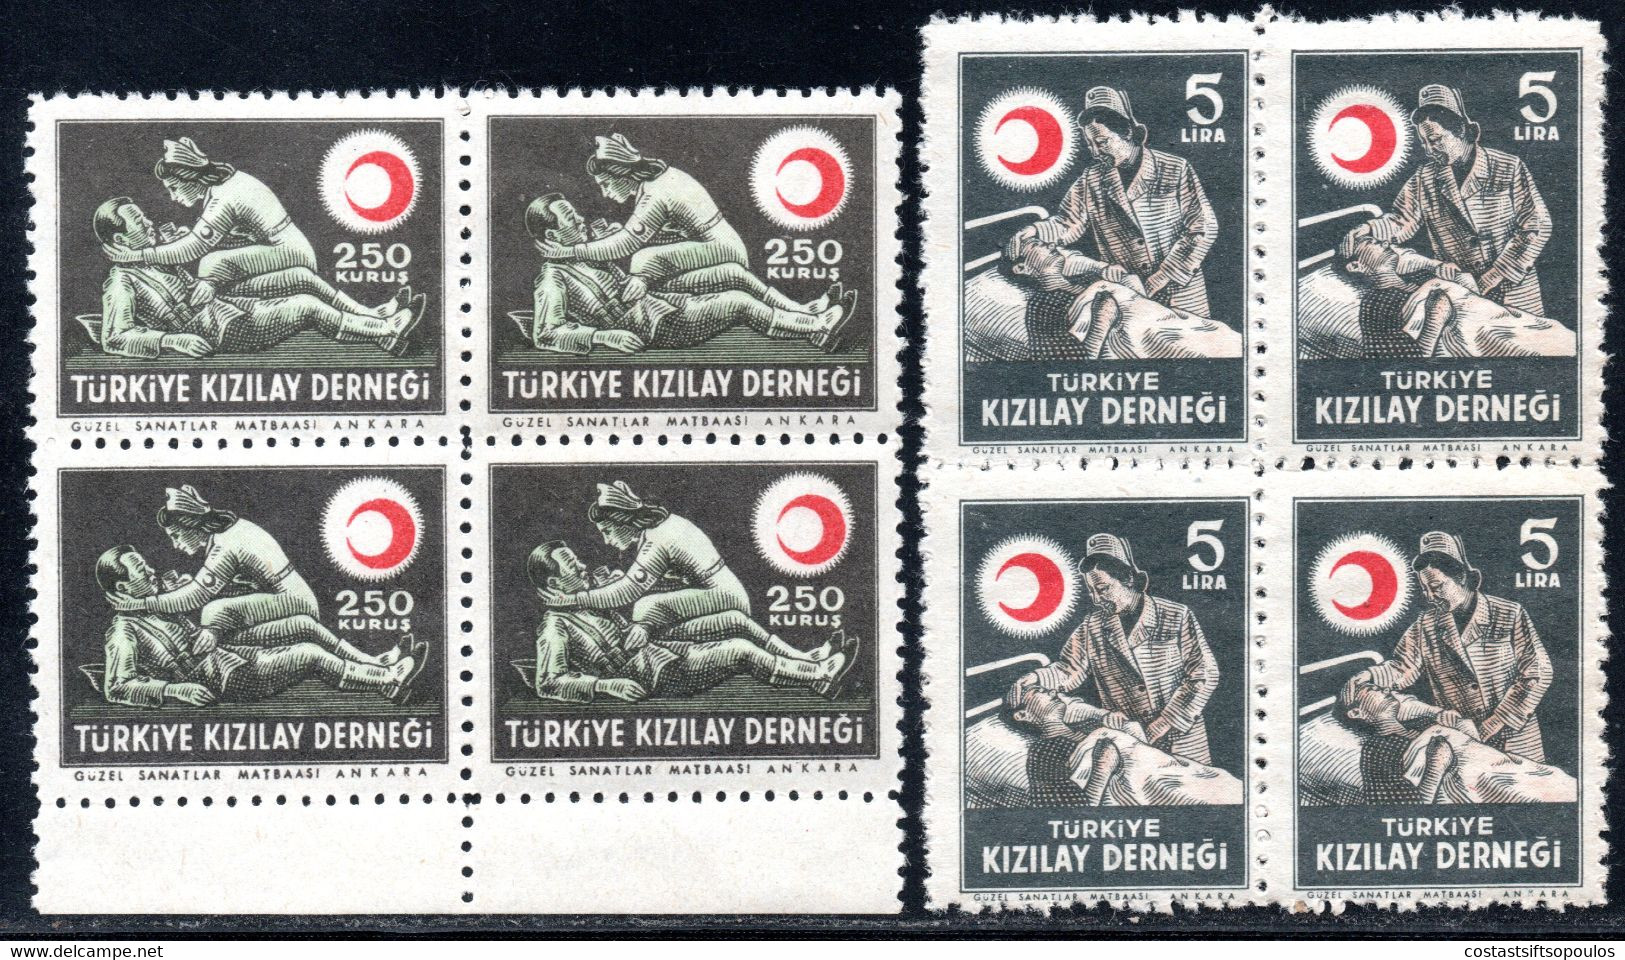 1020.TURKEY,1947. CHARITY RED CRESCENT,MICH. 134-135 MNH BLOCKS OF 4,BICOLORED GUM. - Unused Stamps